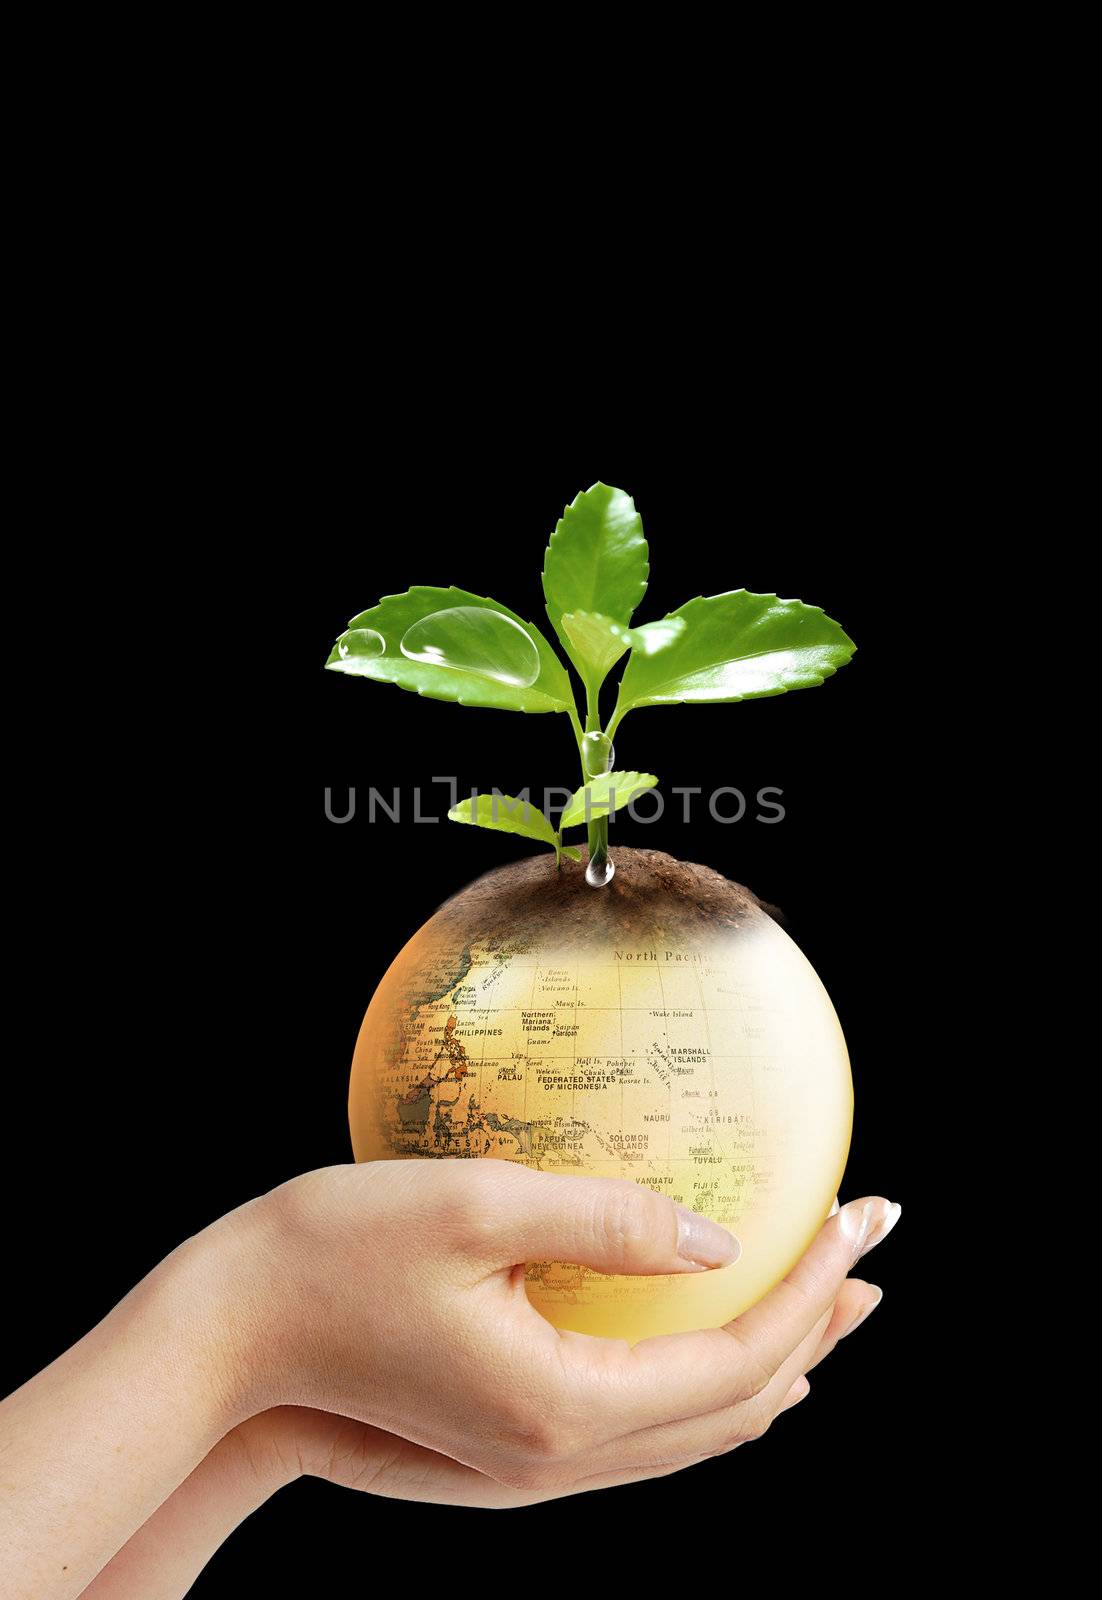 Here you can see nice earth in woman's hands 